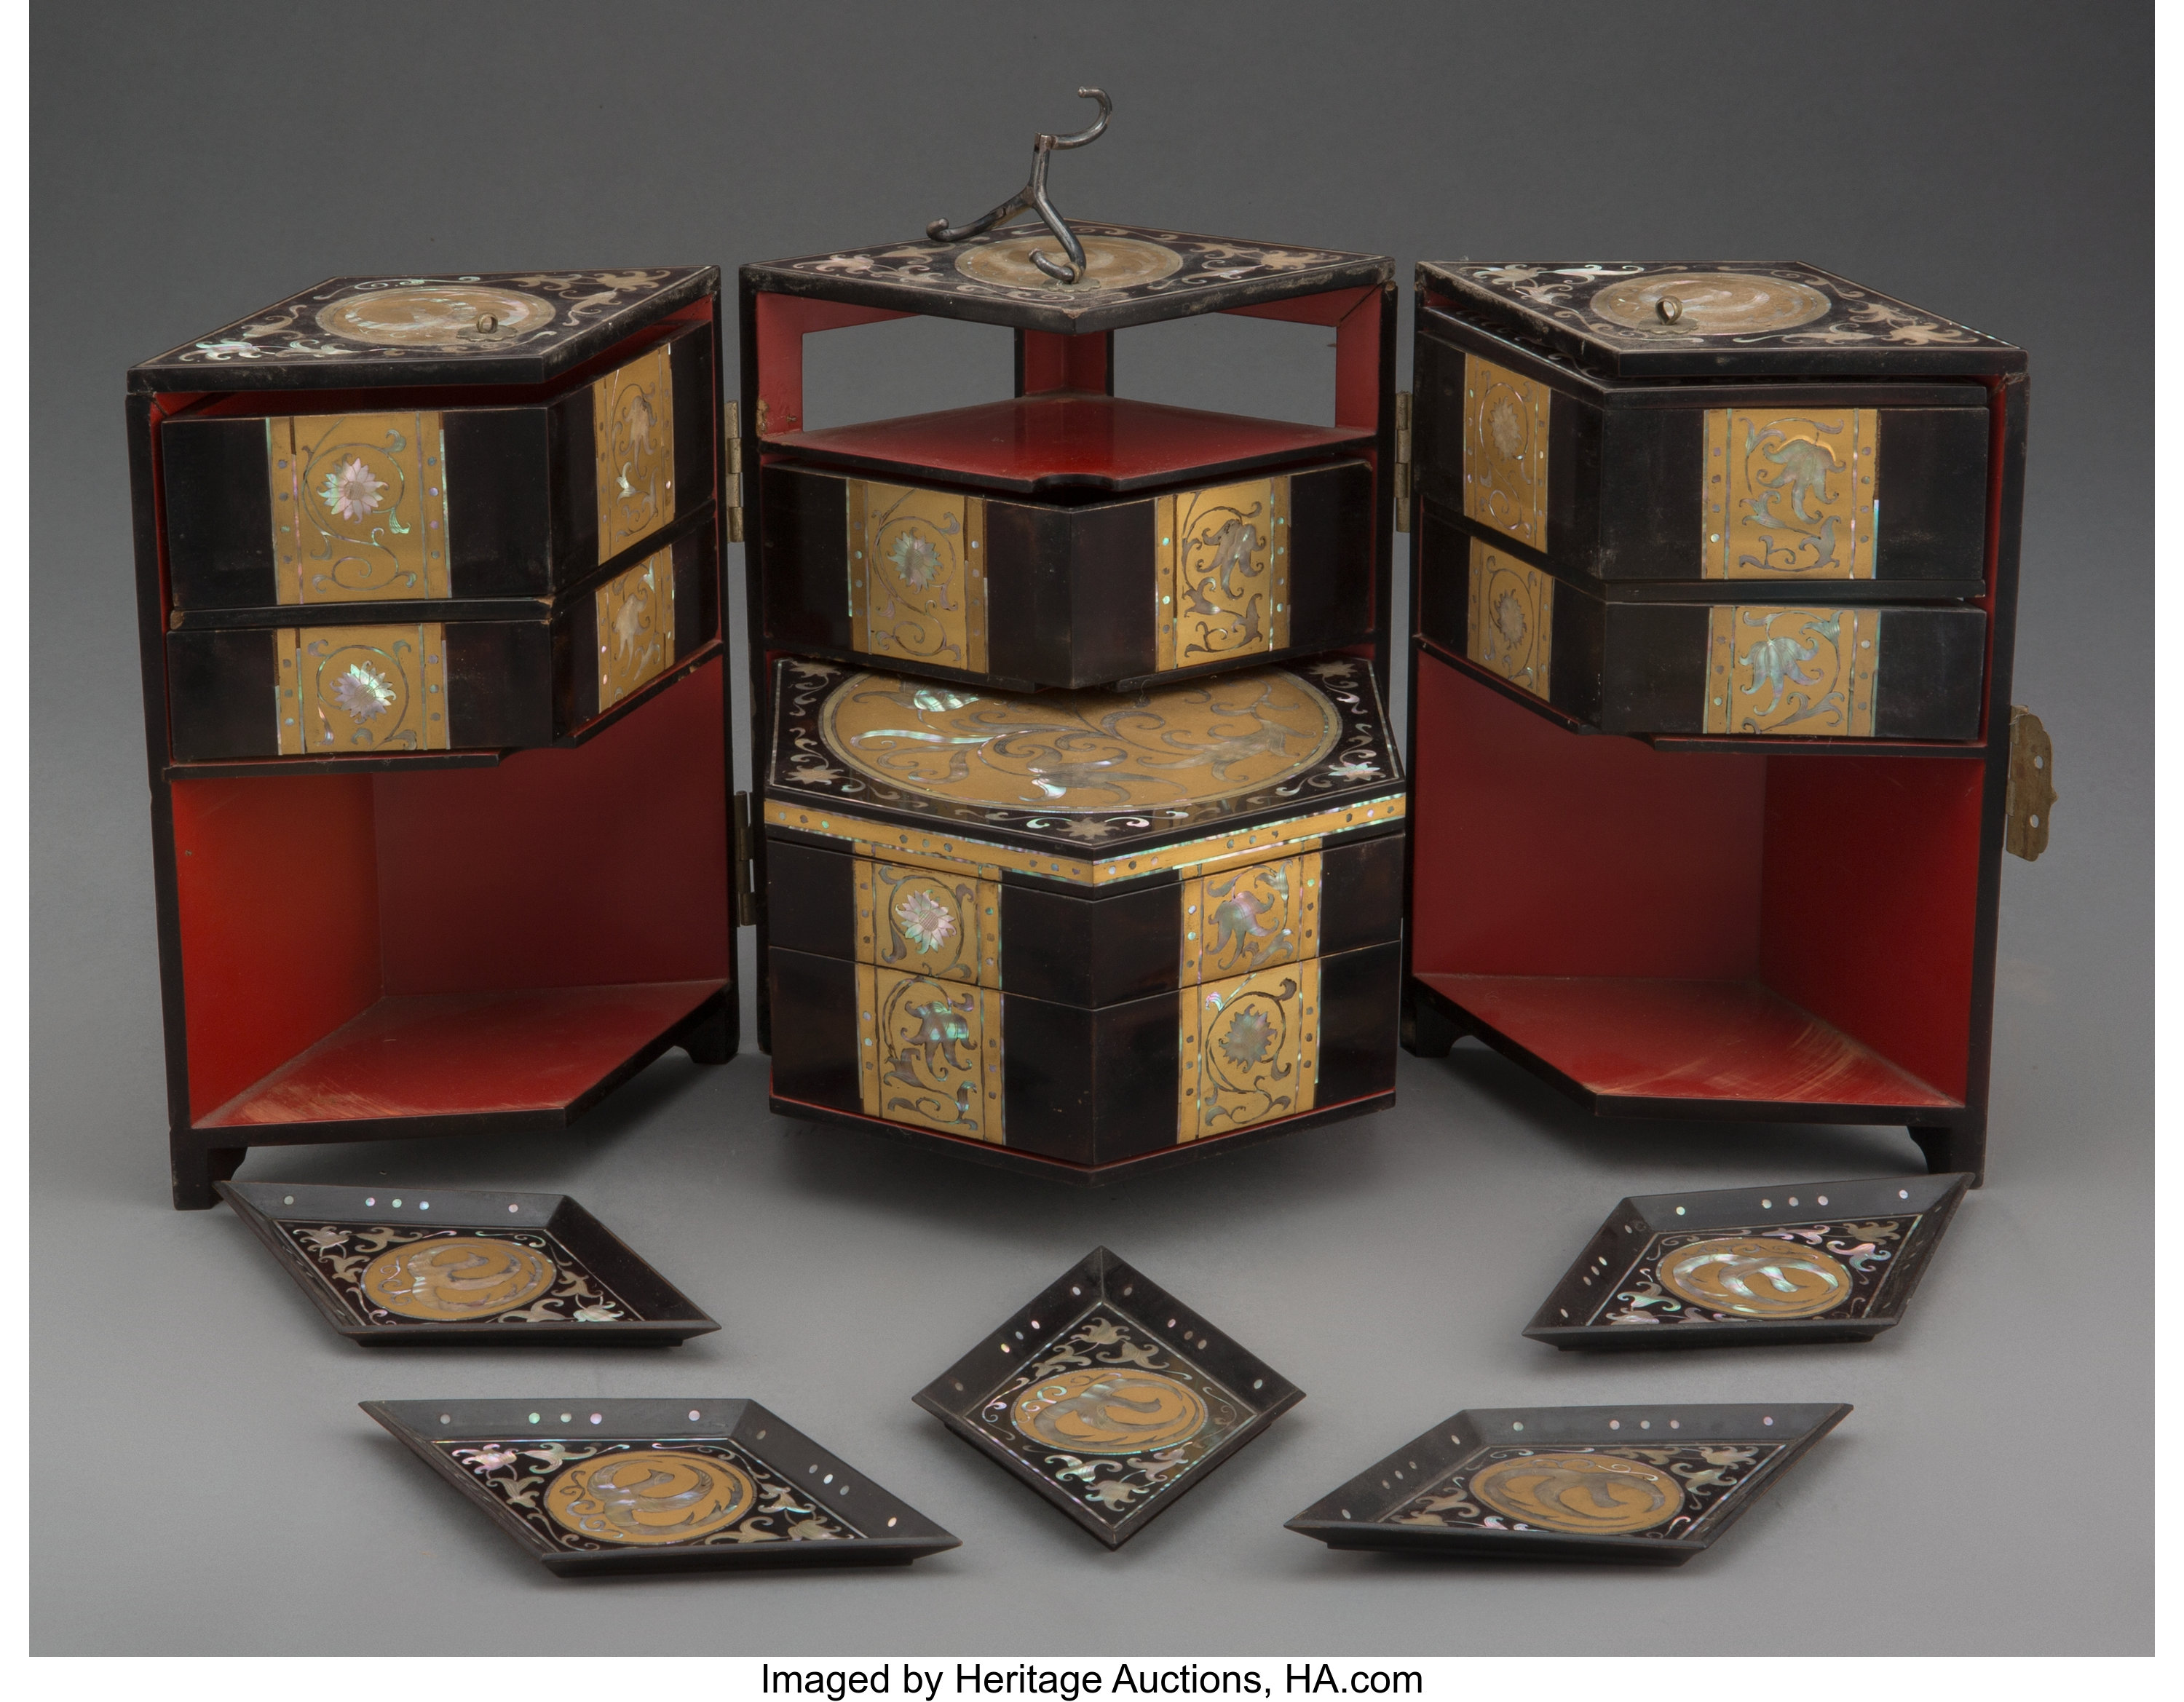 A Korean Mother Of Pearl And Gilt Wood Inlaid Lacquer Cabinet Box Lot 211 Heritage Auctions